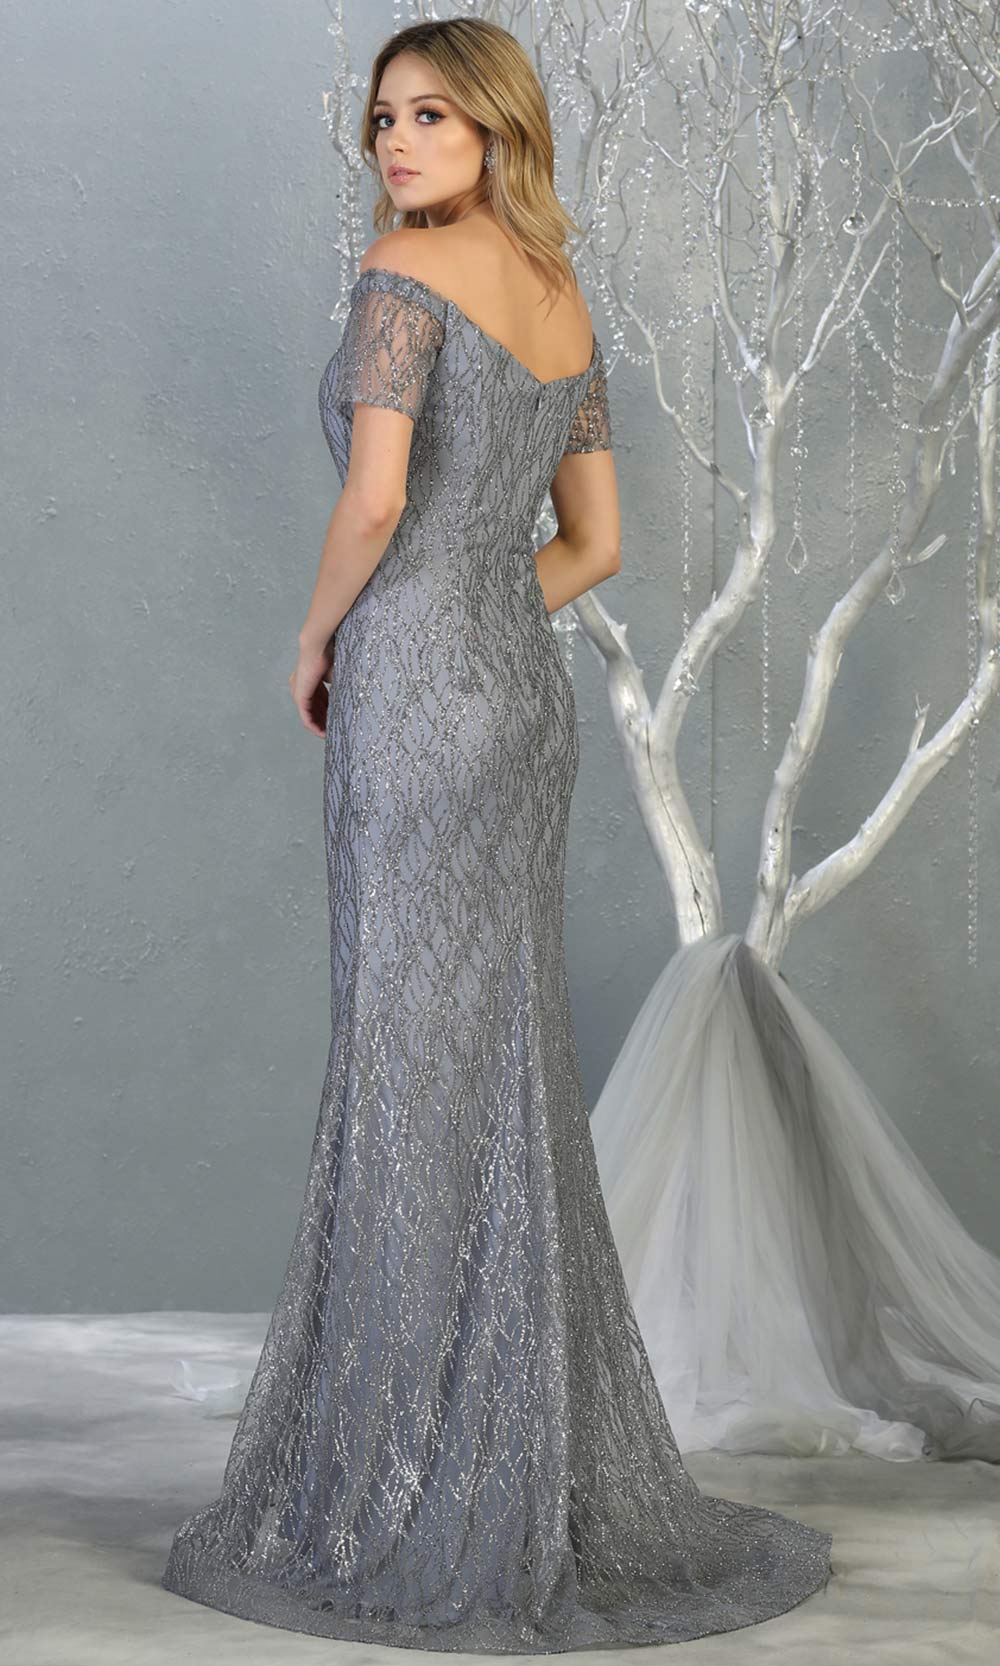 Mayqueen MQ1824 long dusty blue fitted sequin glittery dress w/off shoulder. Full length blue grey gown is perfect for enagagement/e-shoot dress, wedding reception dress, indowestern gown, bridesmaid, formal evening party dress. Plus sizes avail-b.jpg